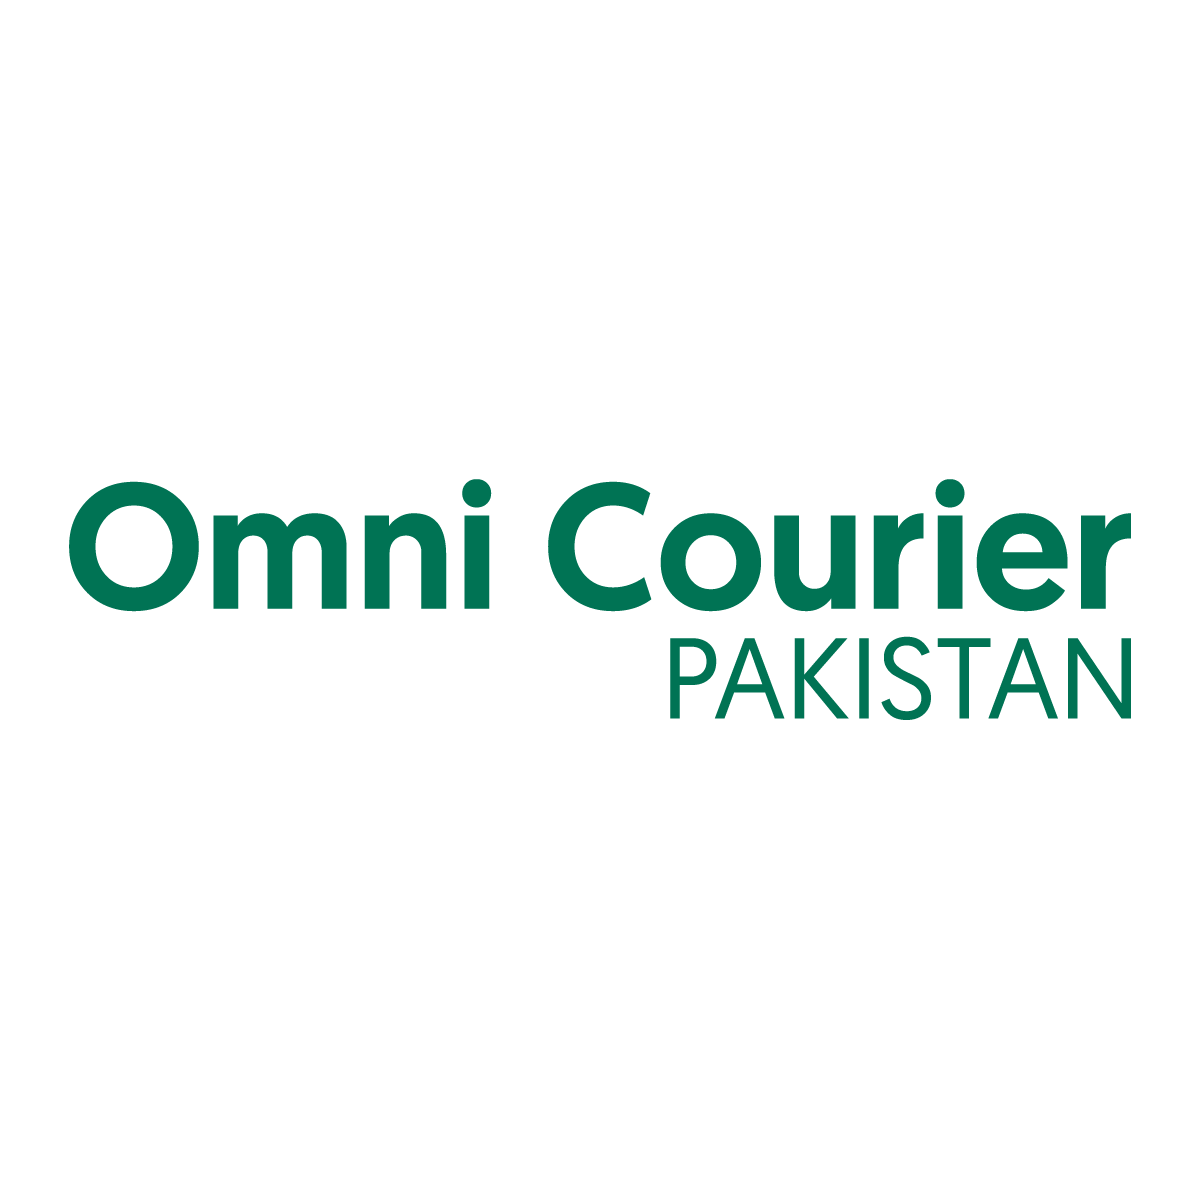 Omni Courier Pakistan for Shopify